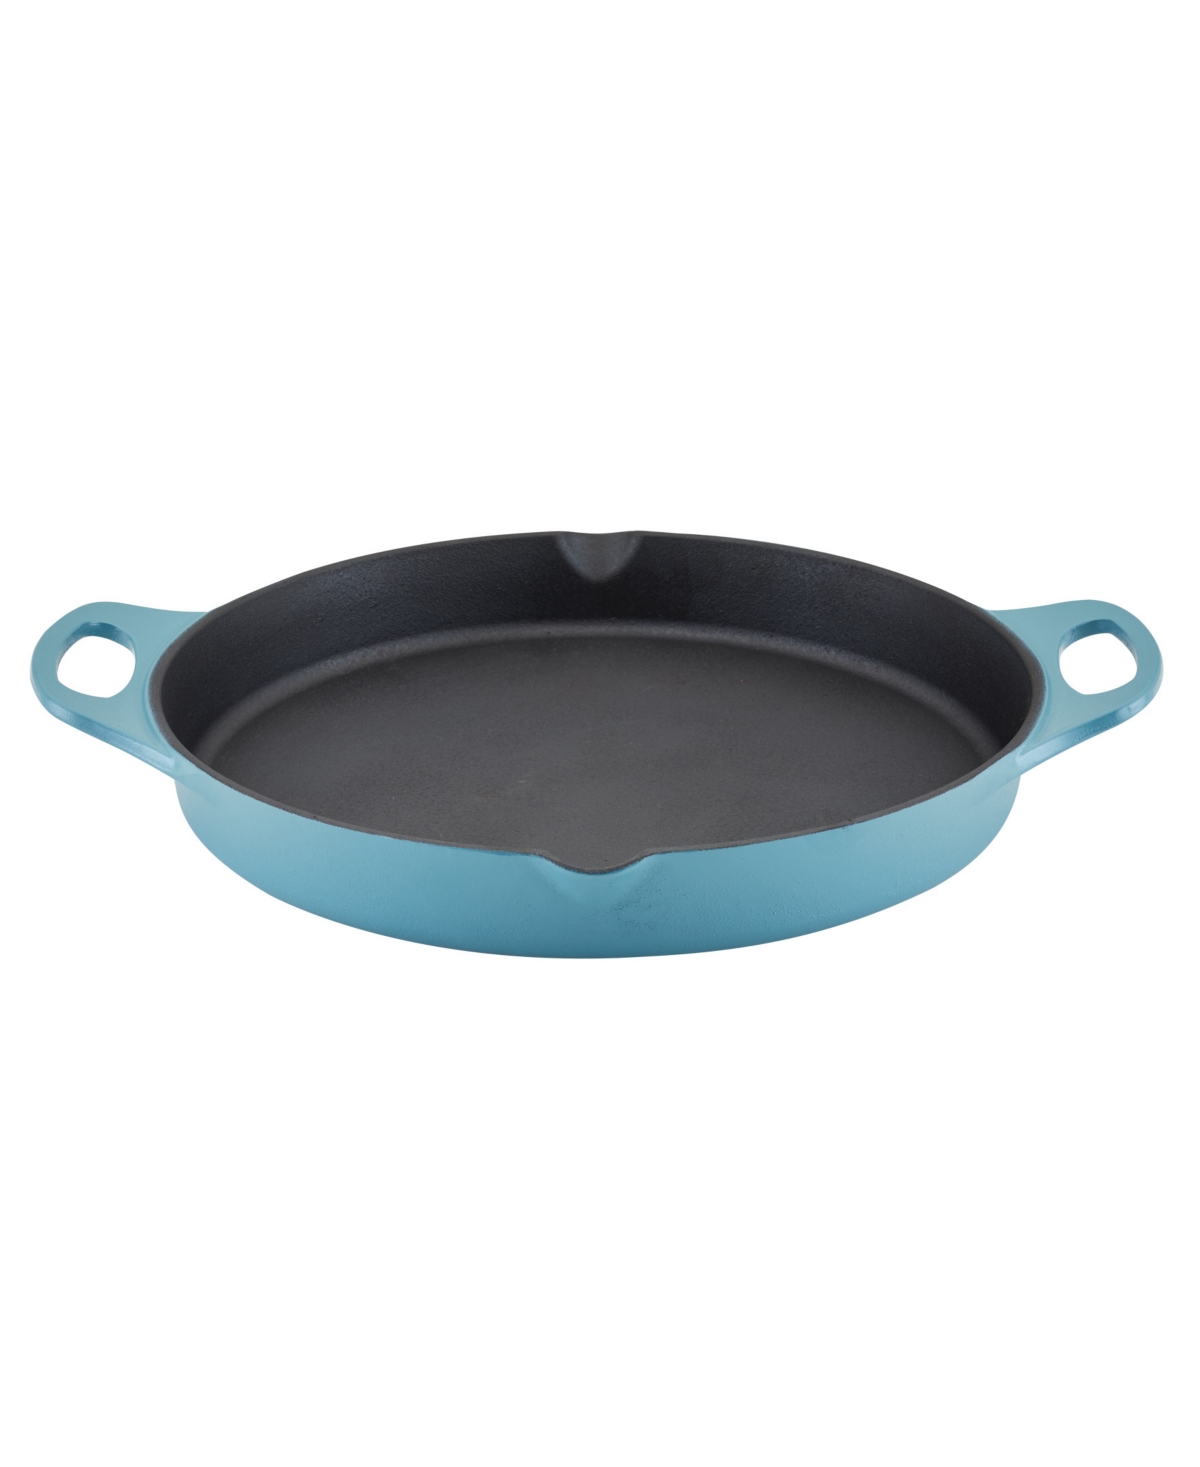 Rachael Ray Nitro Cast Iron 14" Skillet With Side Handles In Blue